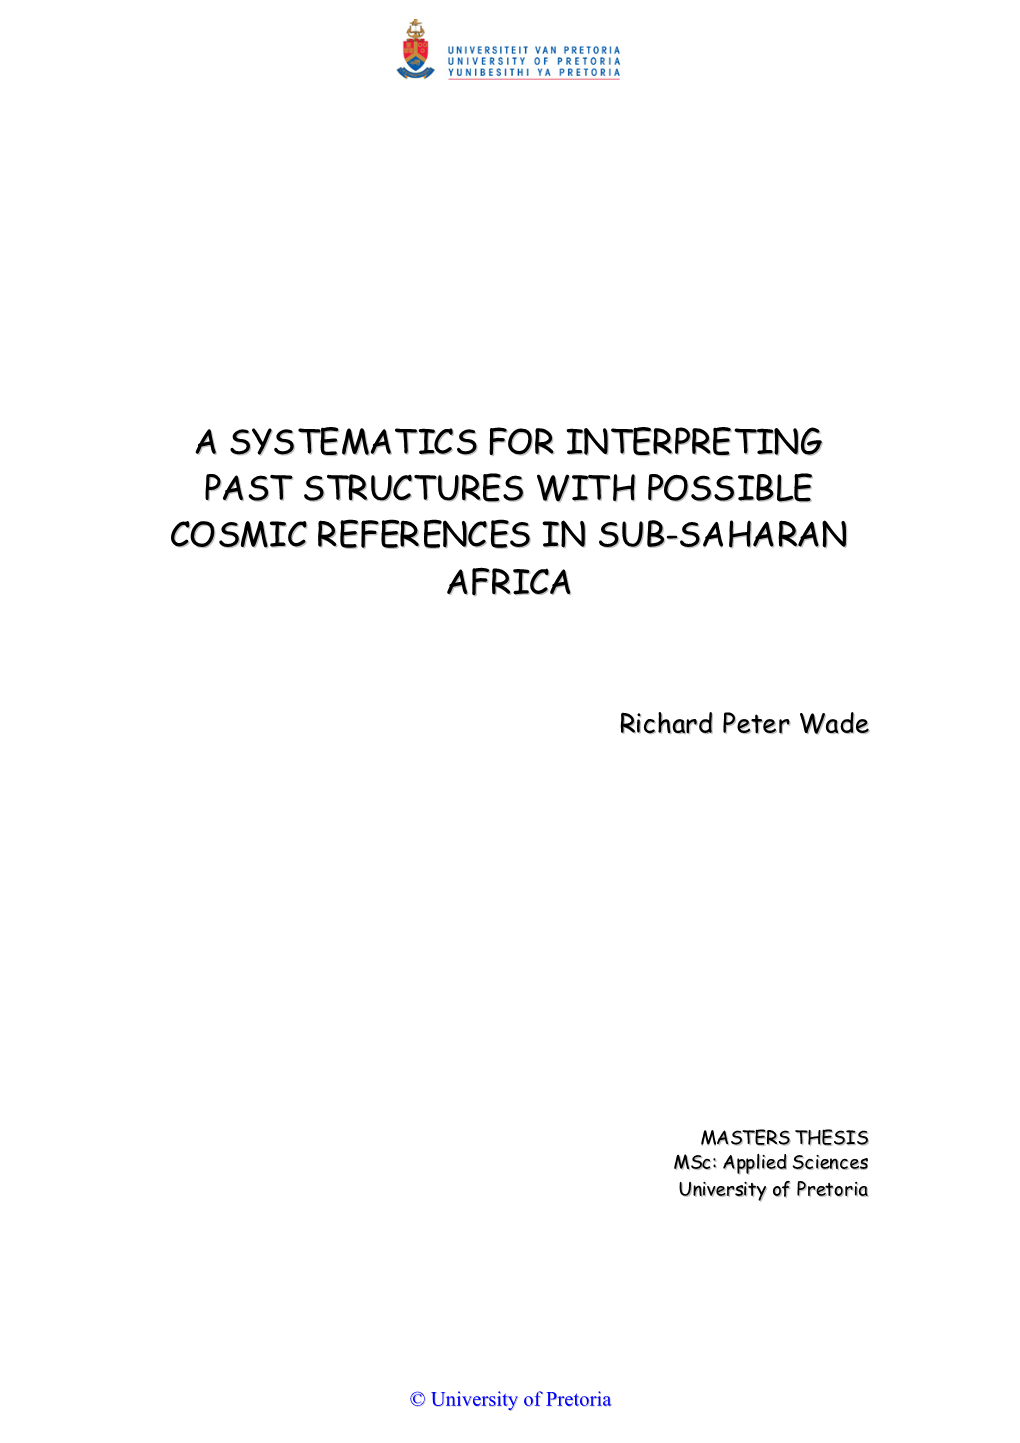 A Systematics for Interpreting Past Structures with Possible Cosmic References in Sub-Saharan Africa